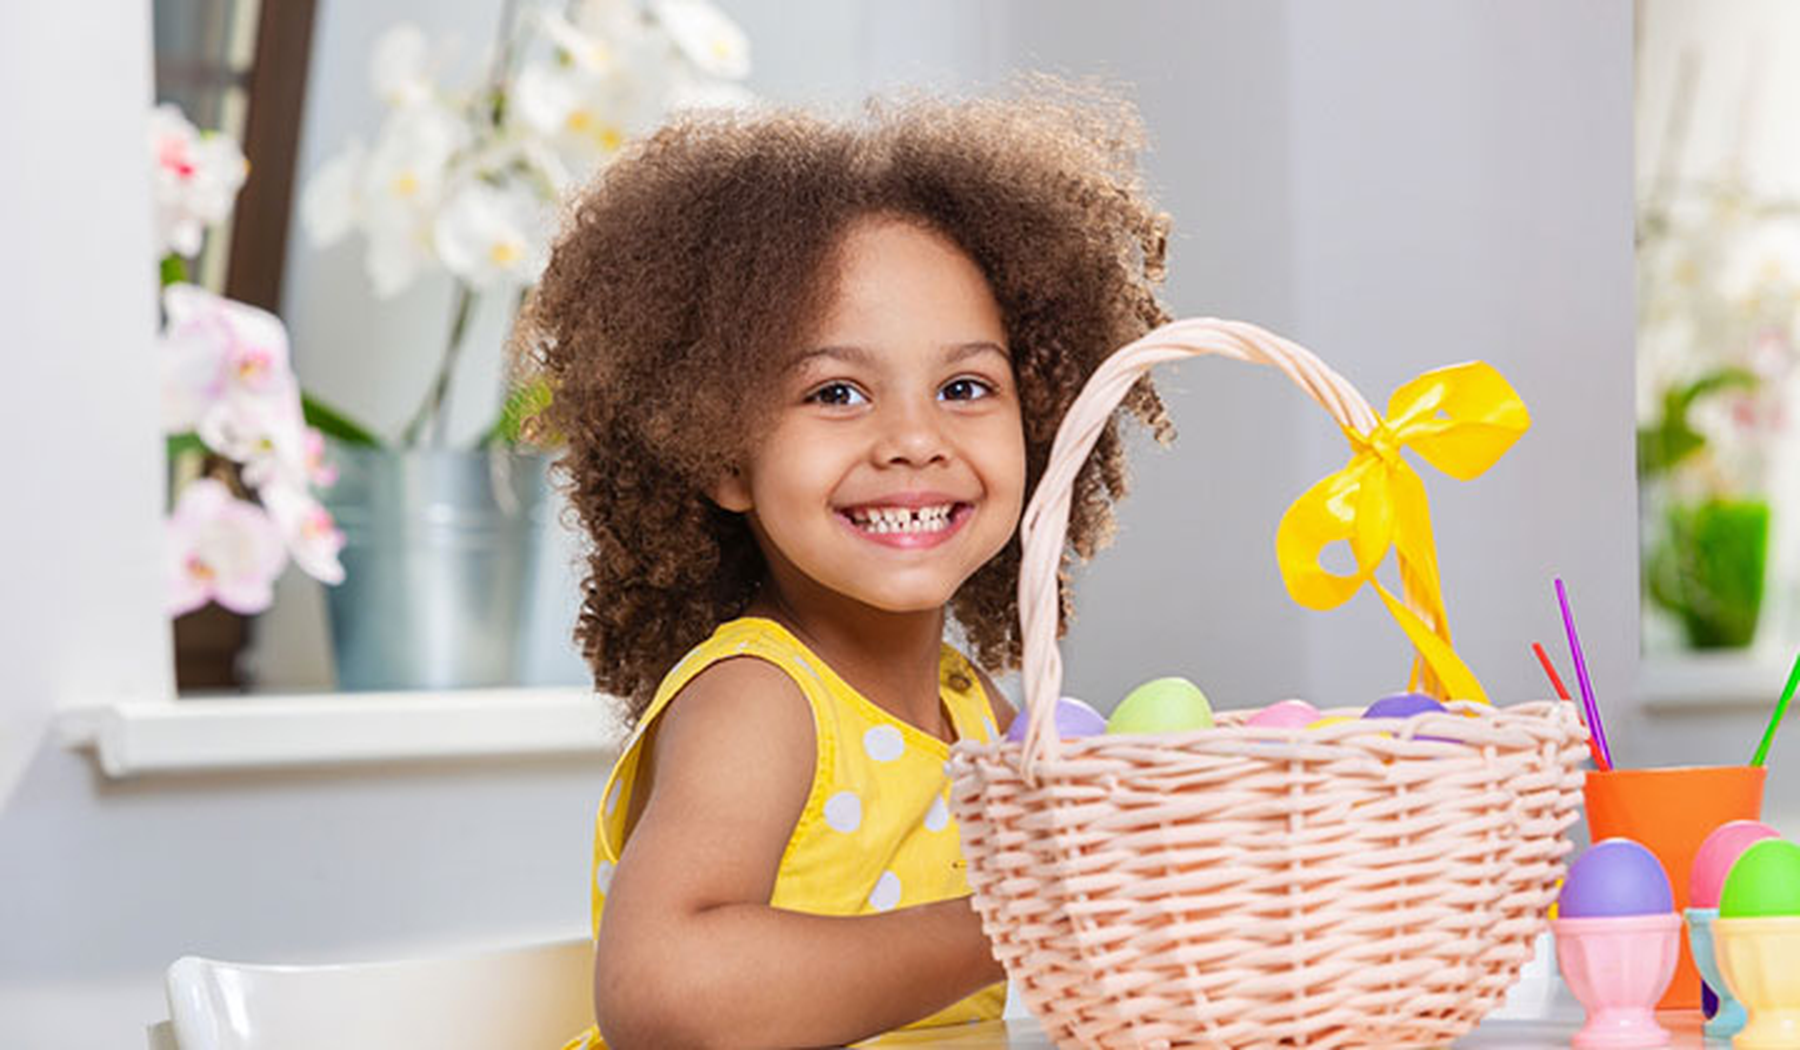 Smiling girl in yellow dress with an Easter basket